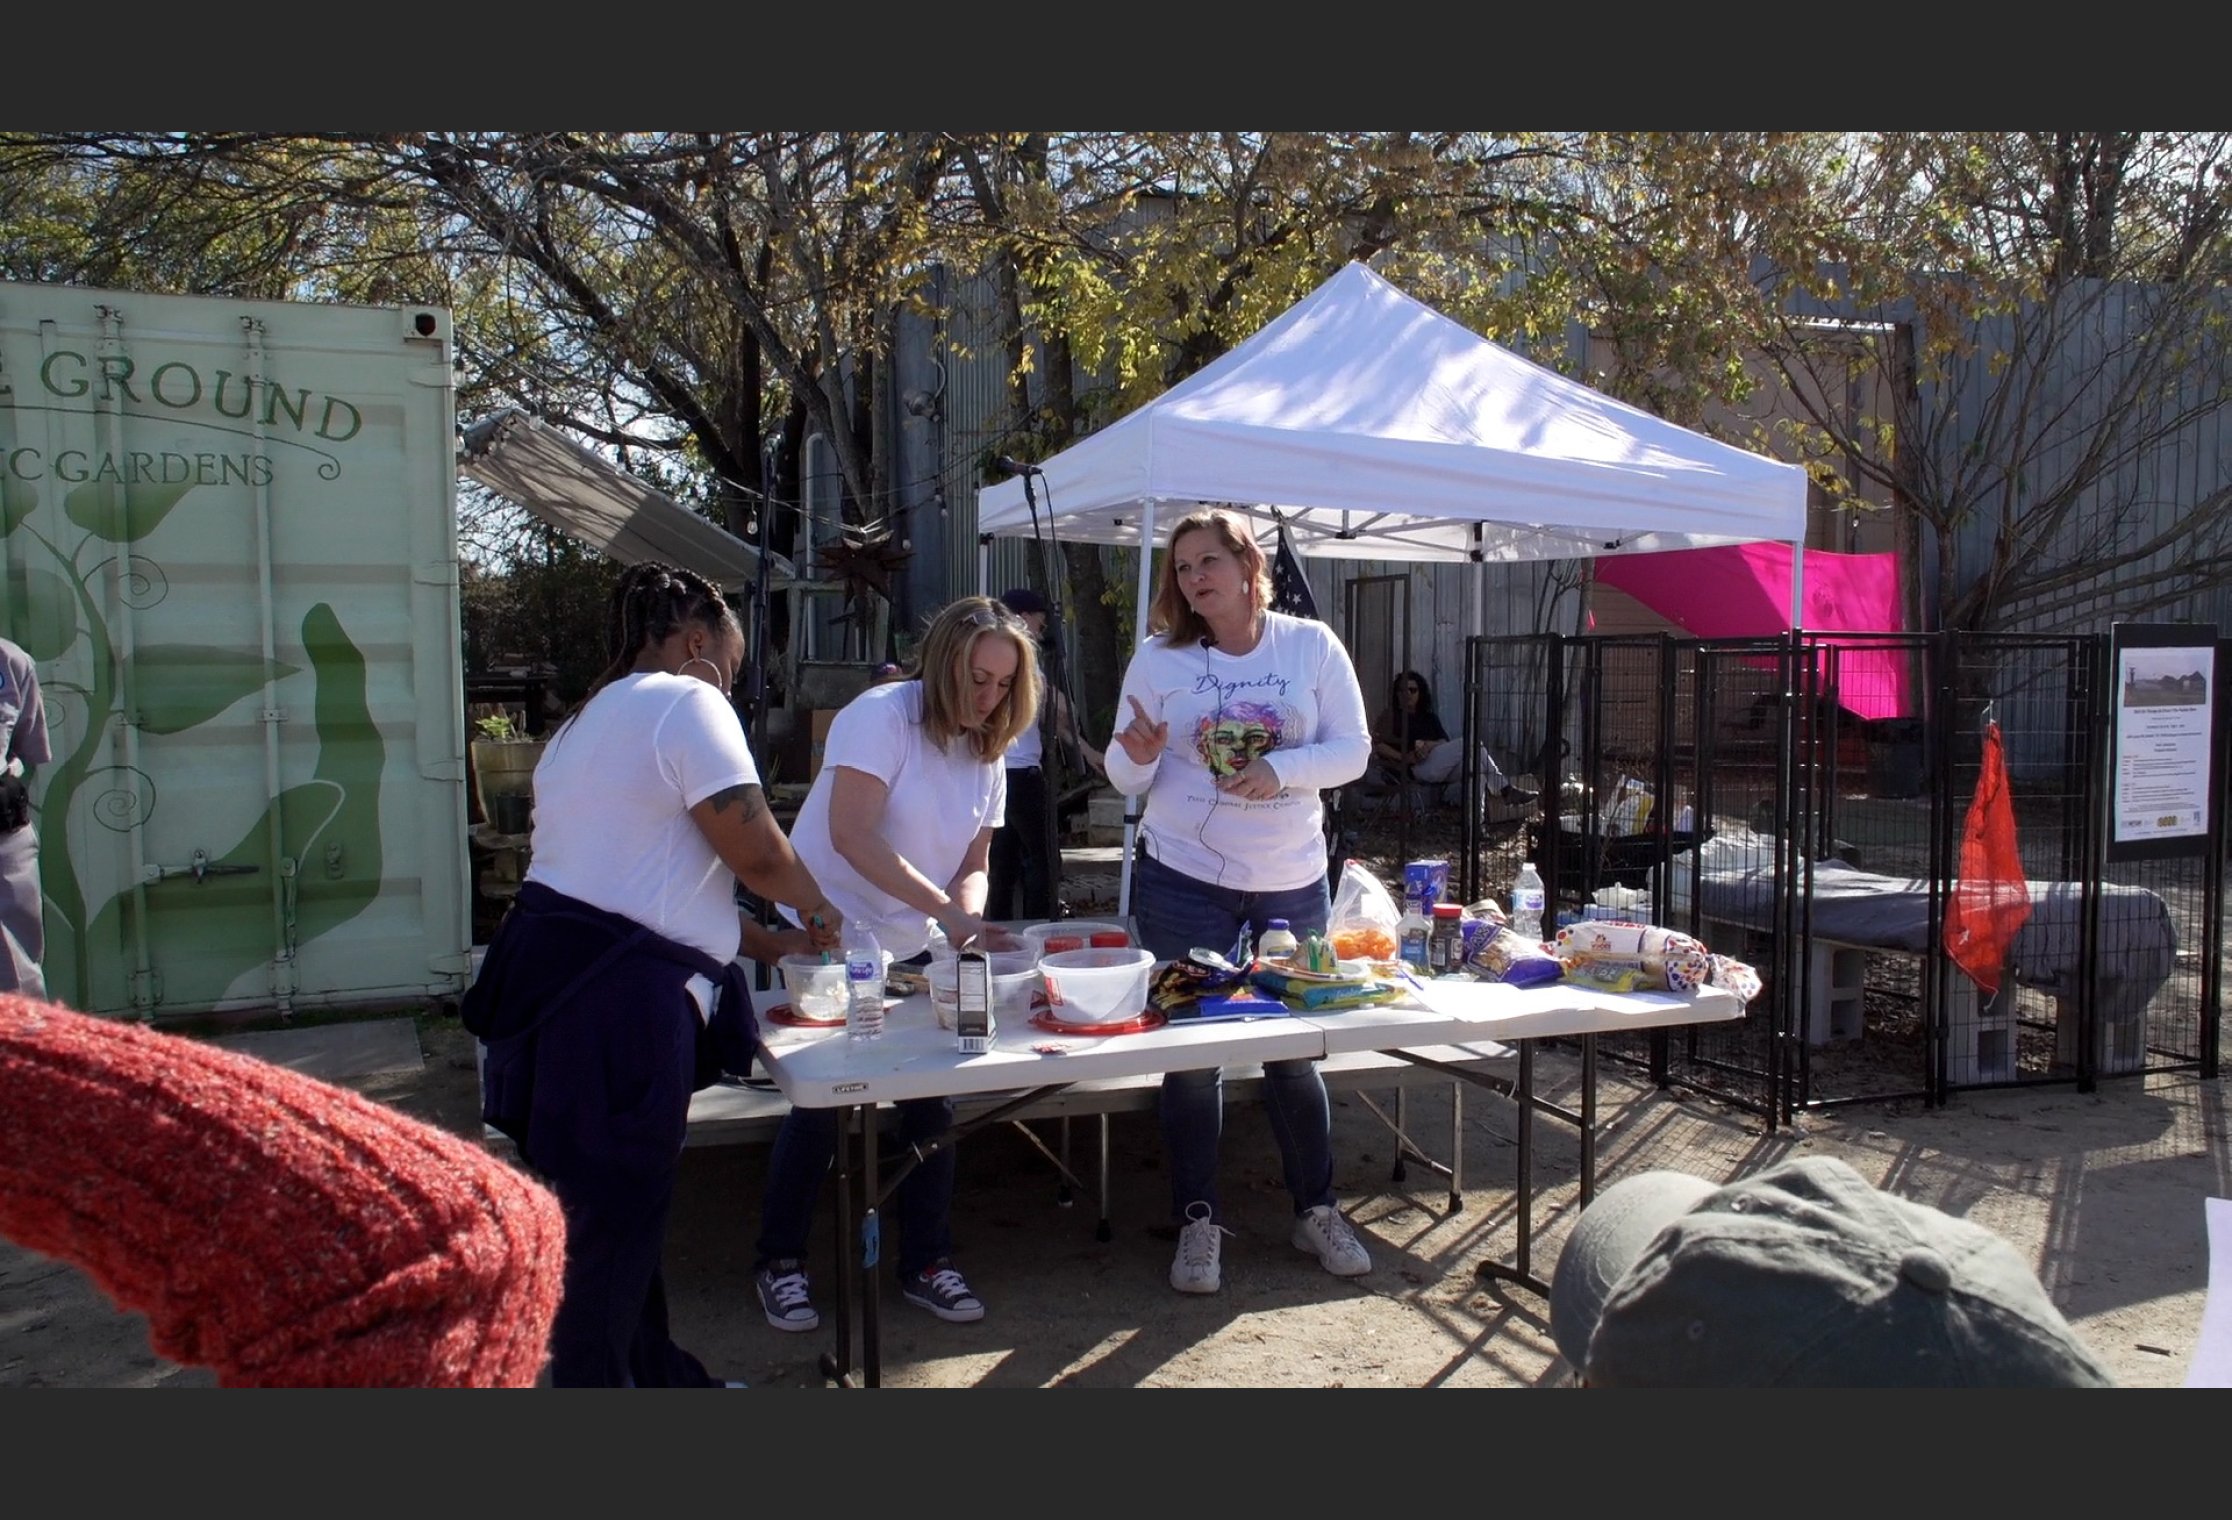 “Ain’t No Orange in Texas: The Variety Show”, 2019. Performance–cooking demonstration (still), The Museum of Human Achievement (MoHA), Austin, TX, 2019. Image credit: Liz Rodda. Performers (from left): Kirsten Ricketts, Lauren Johnson, Ashika Renae Colema